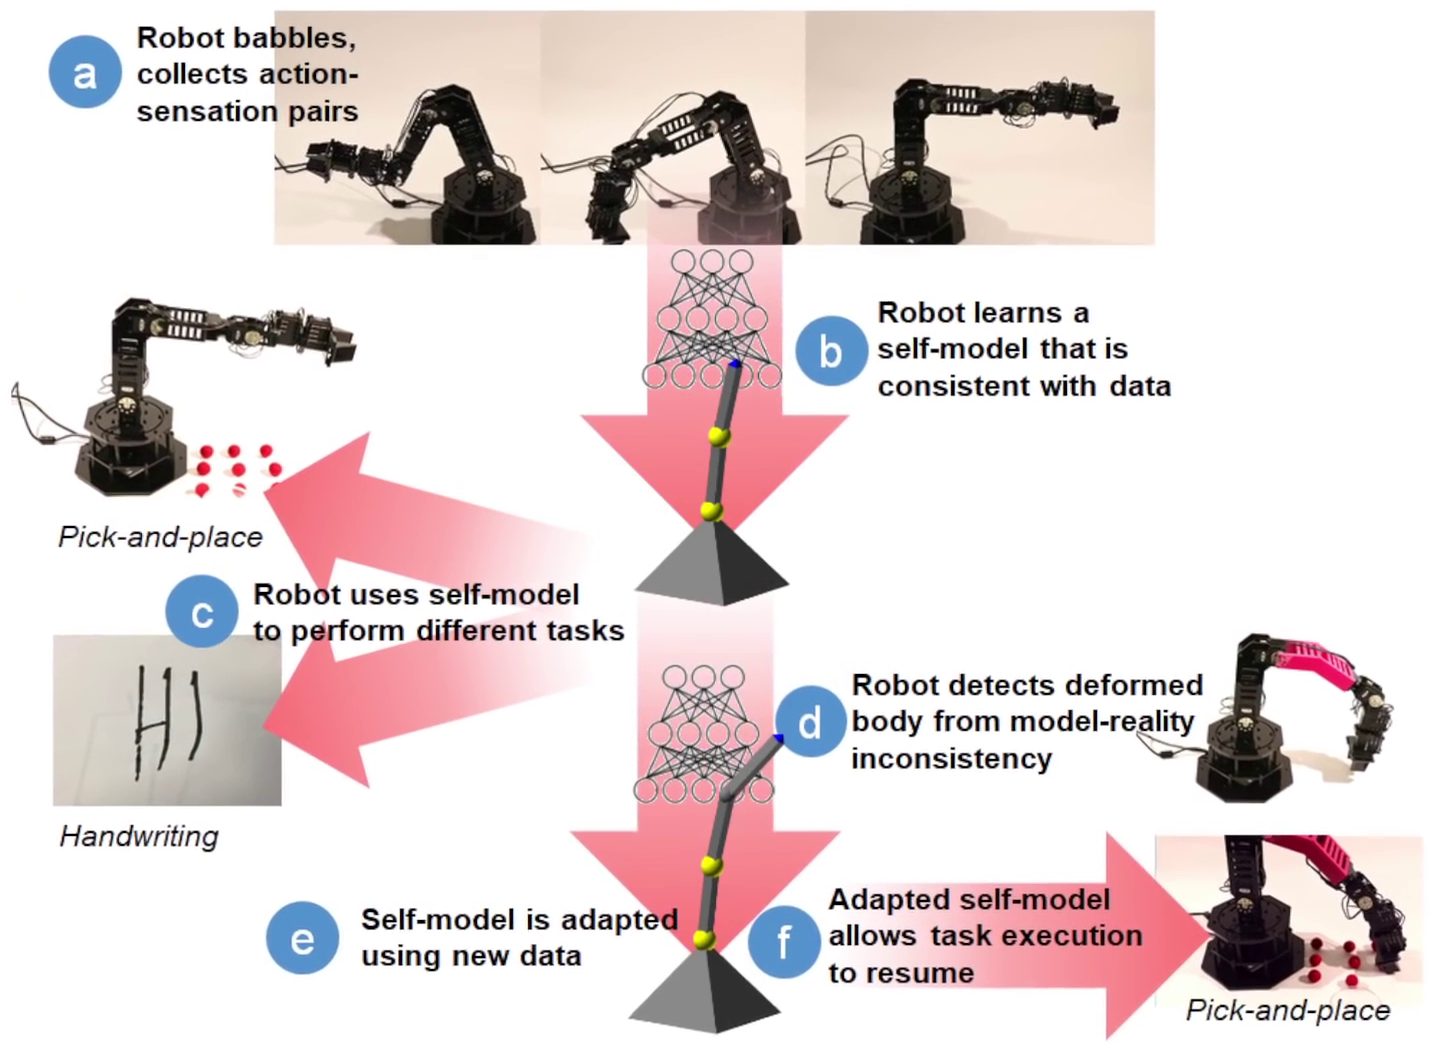 Columbia’s robot generates its own self-model through deep learning, references its model in performing tasks, and can even detect damage to itself by recognizing discrepancies between its self-model and how its body is performing in reality. Source: Columbia Engineering. (Click image to enlarge.)